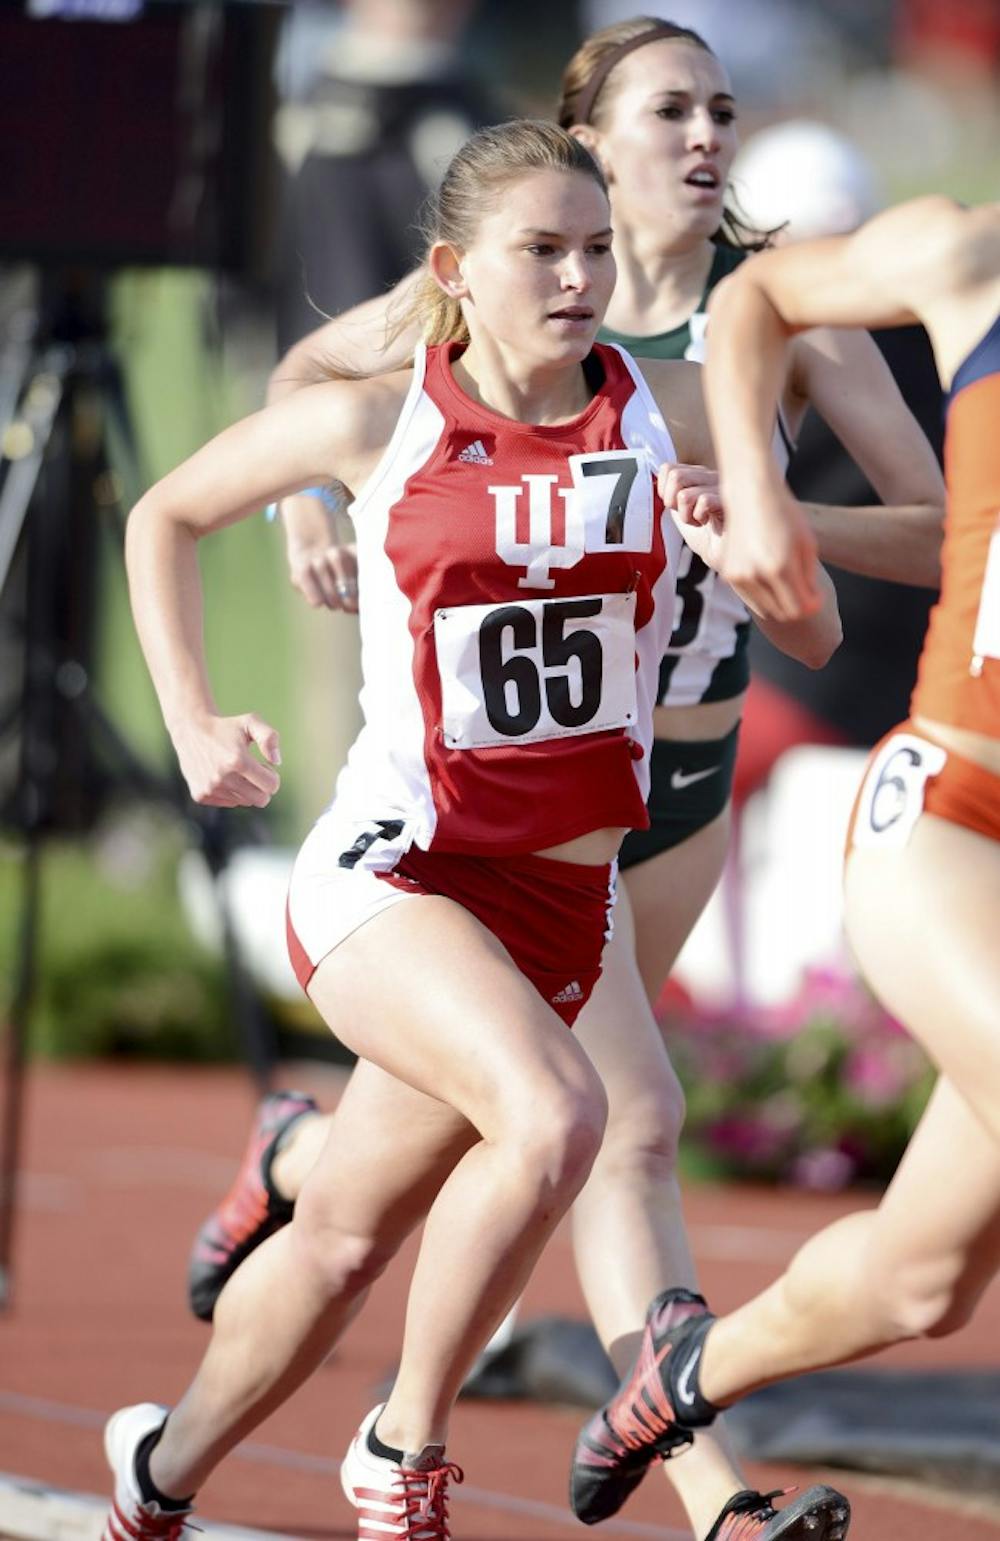 Samantha Gwin races on May 17, 2014 at the Big Ten Championships in West Lafayette, Ind.